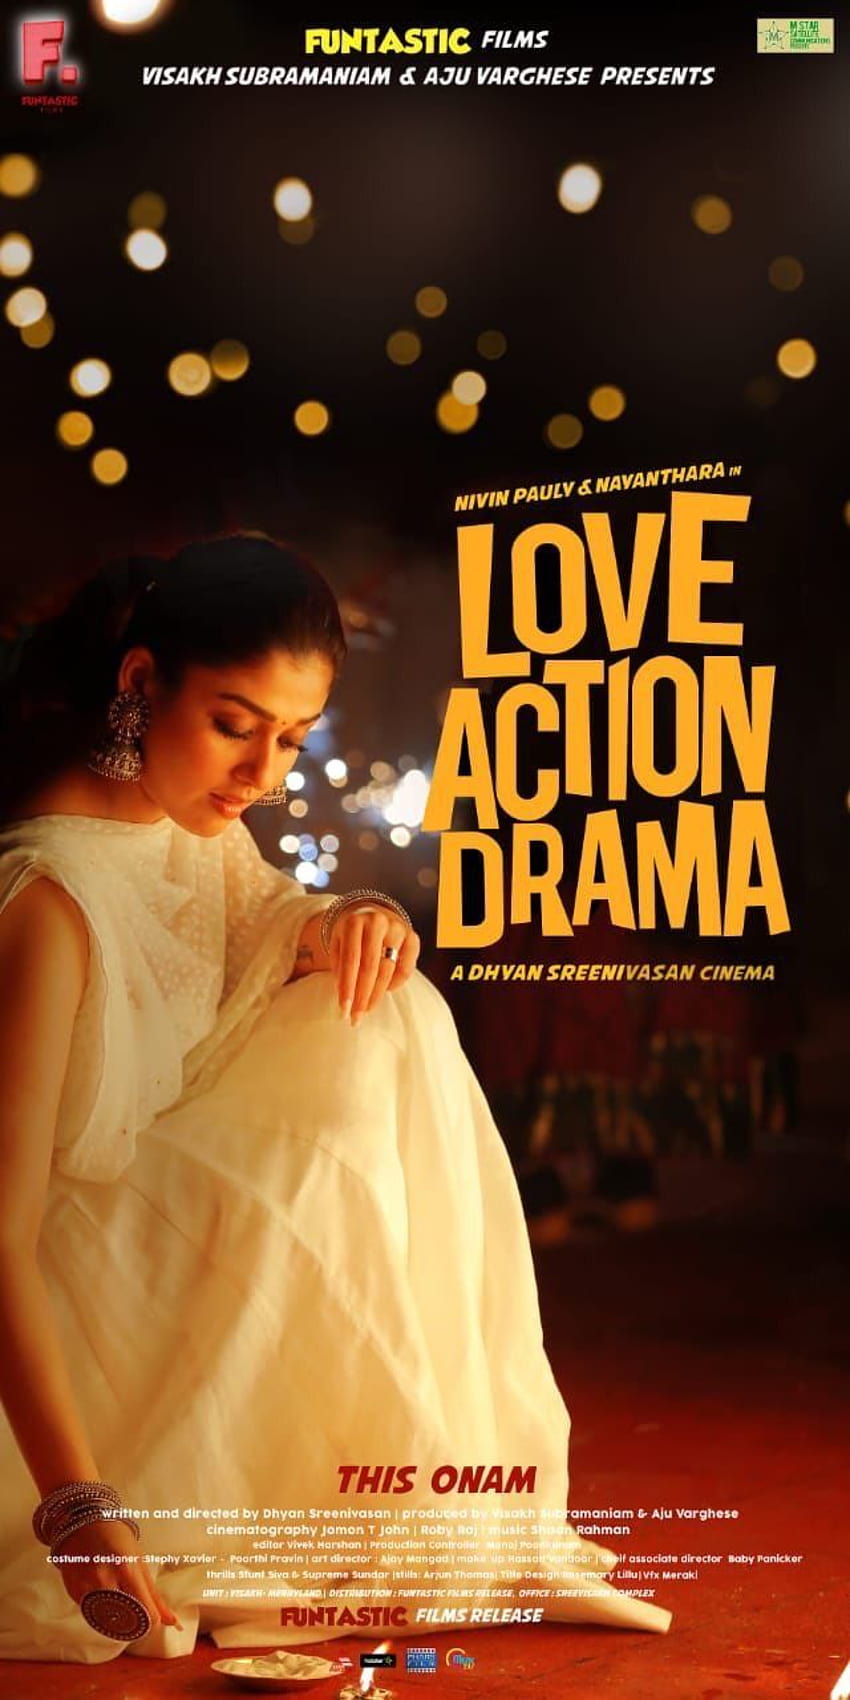 Love Action Drama Movie Poster & First Look on HD phone wallpaper